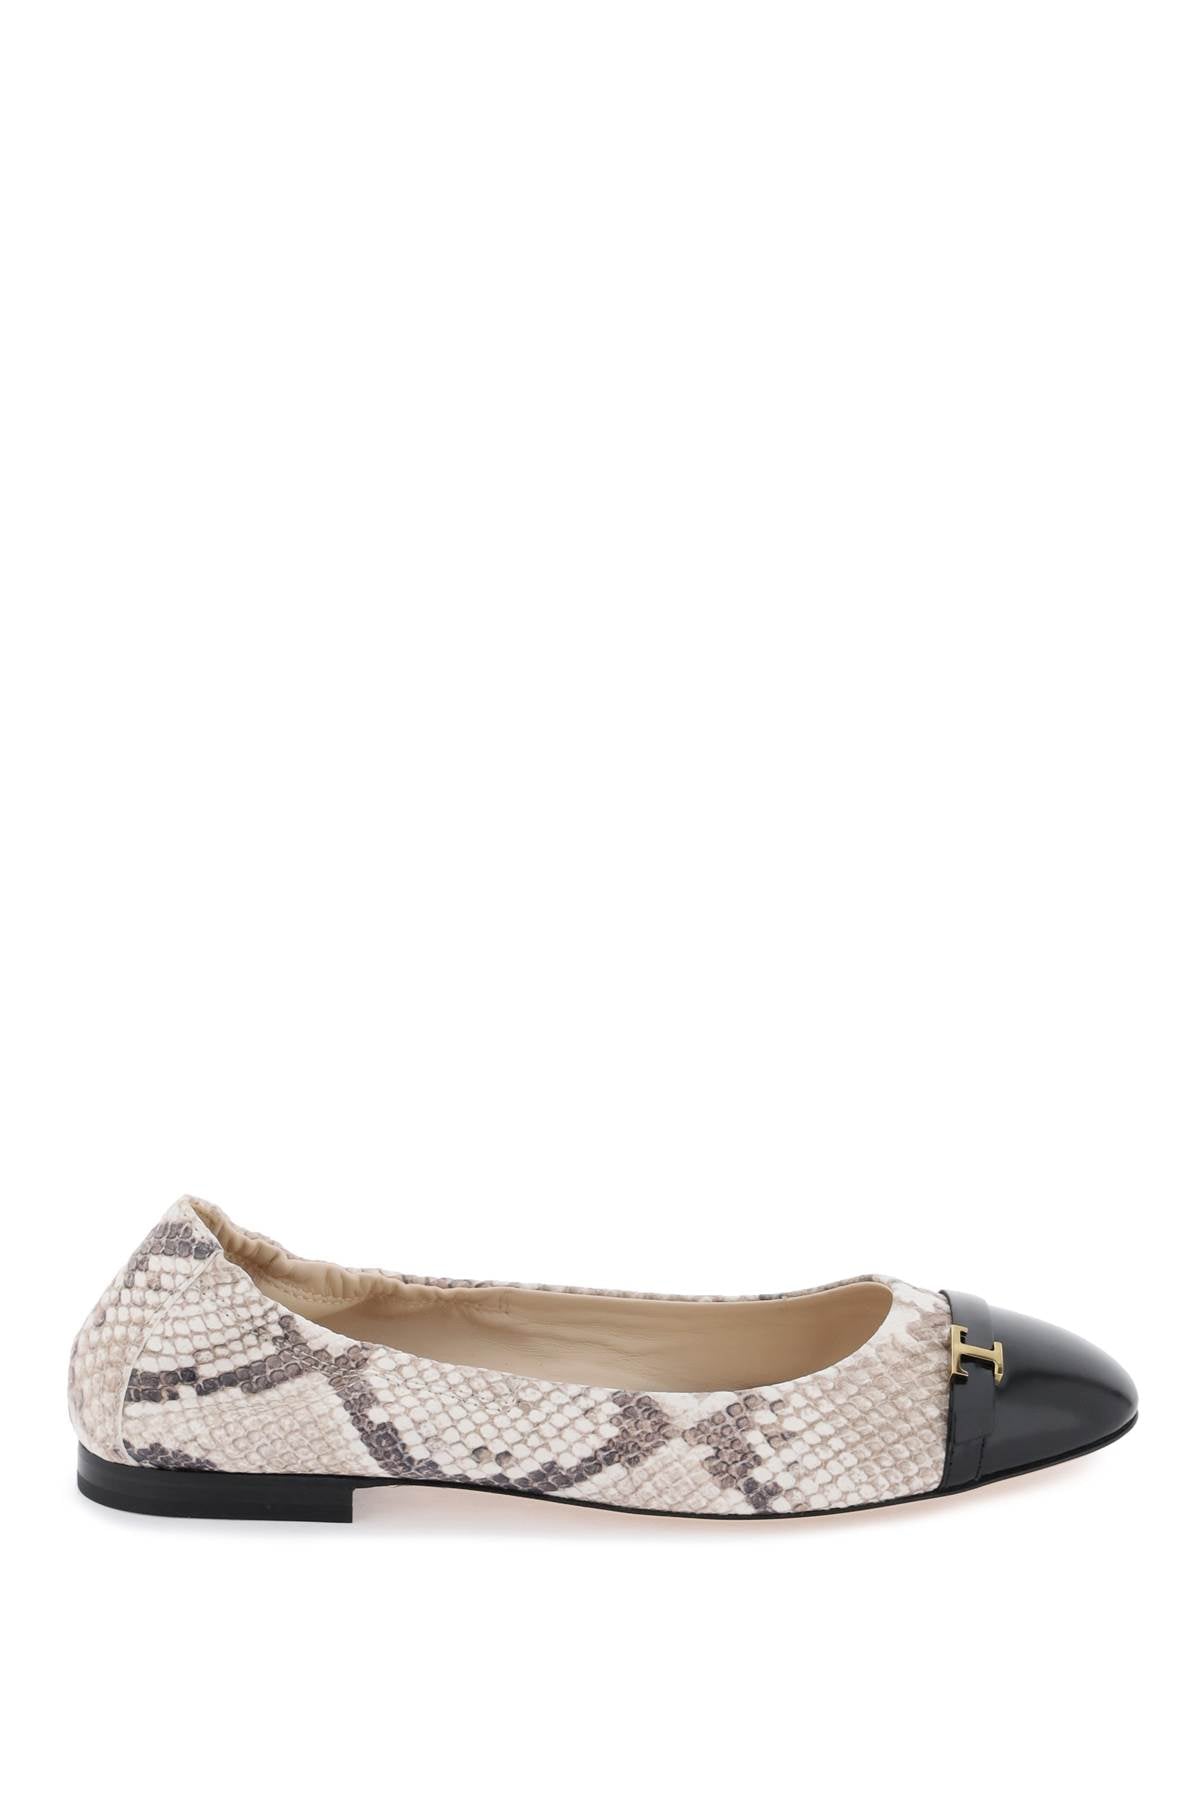 Tod's Snake-printed Leather Ballet Flats - 36 Nero